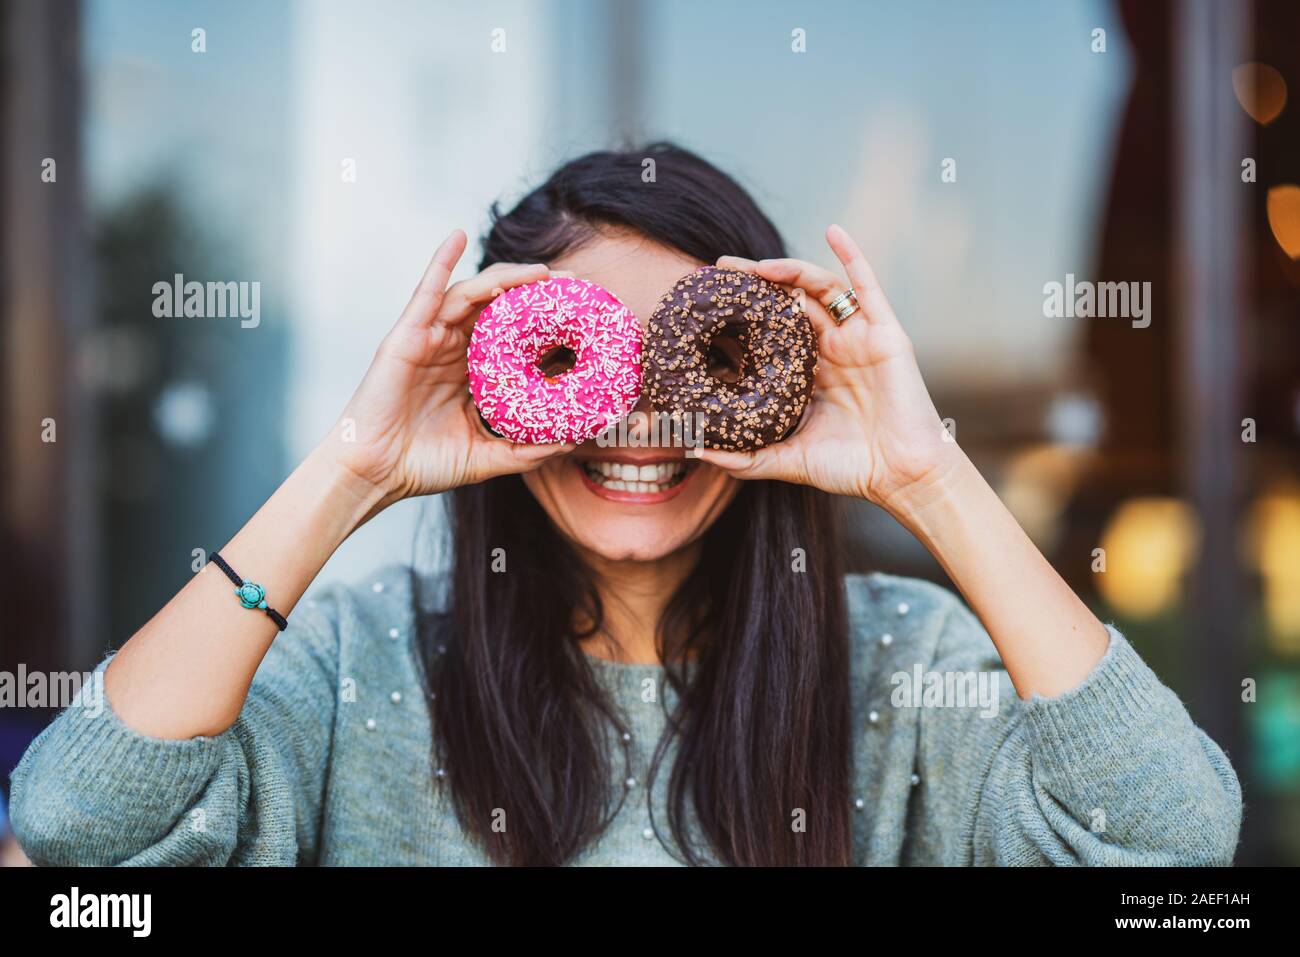 Woman is holding delicious and colored donuts with humor. Stock Photo